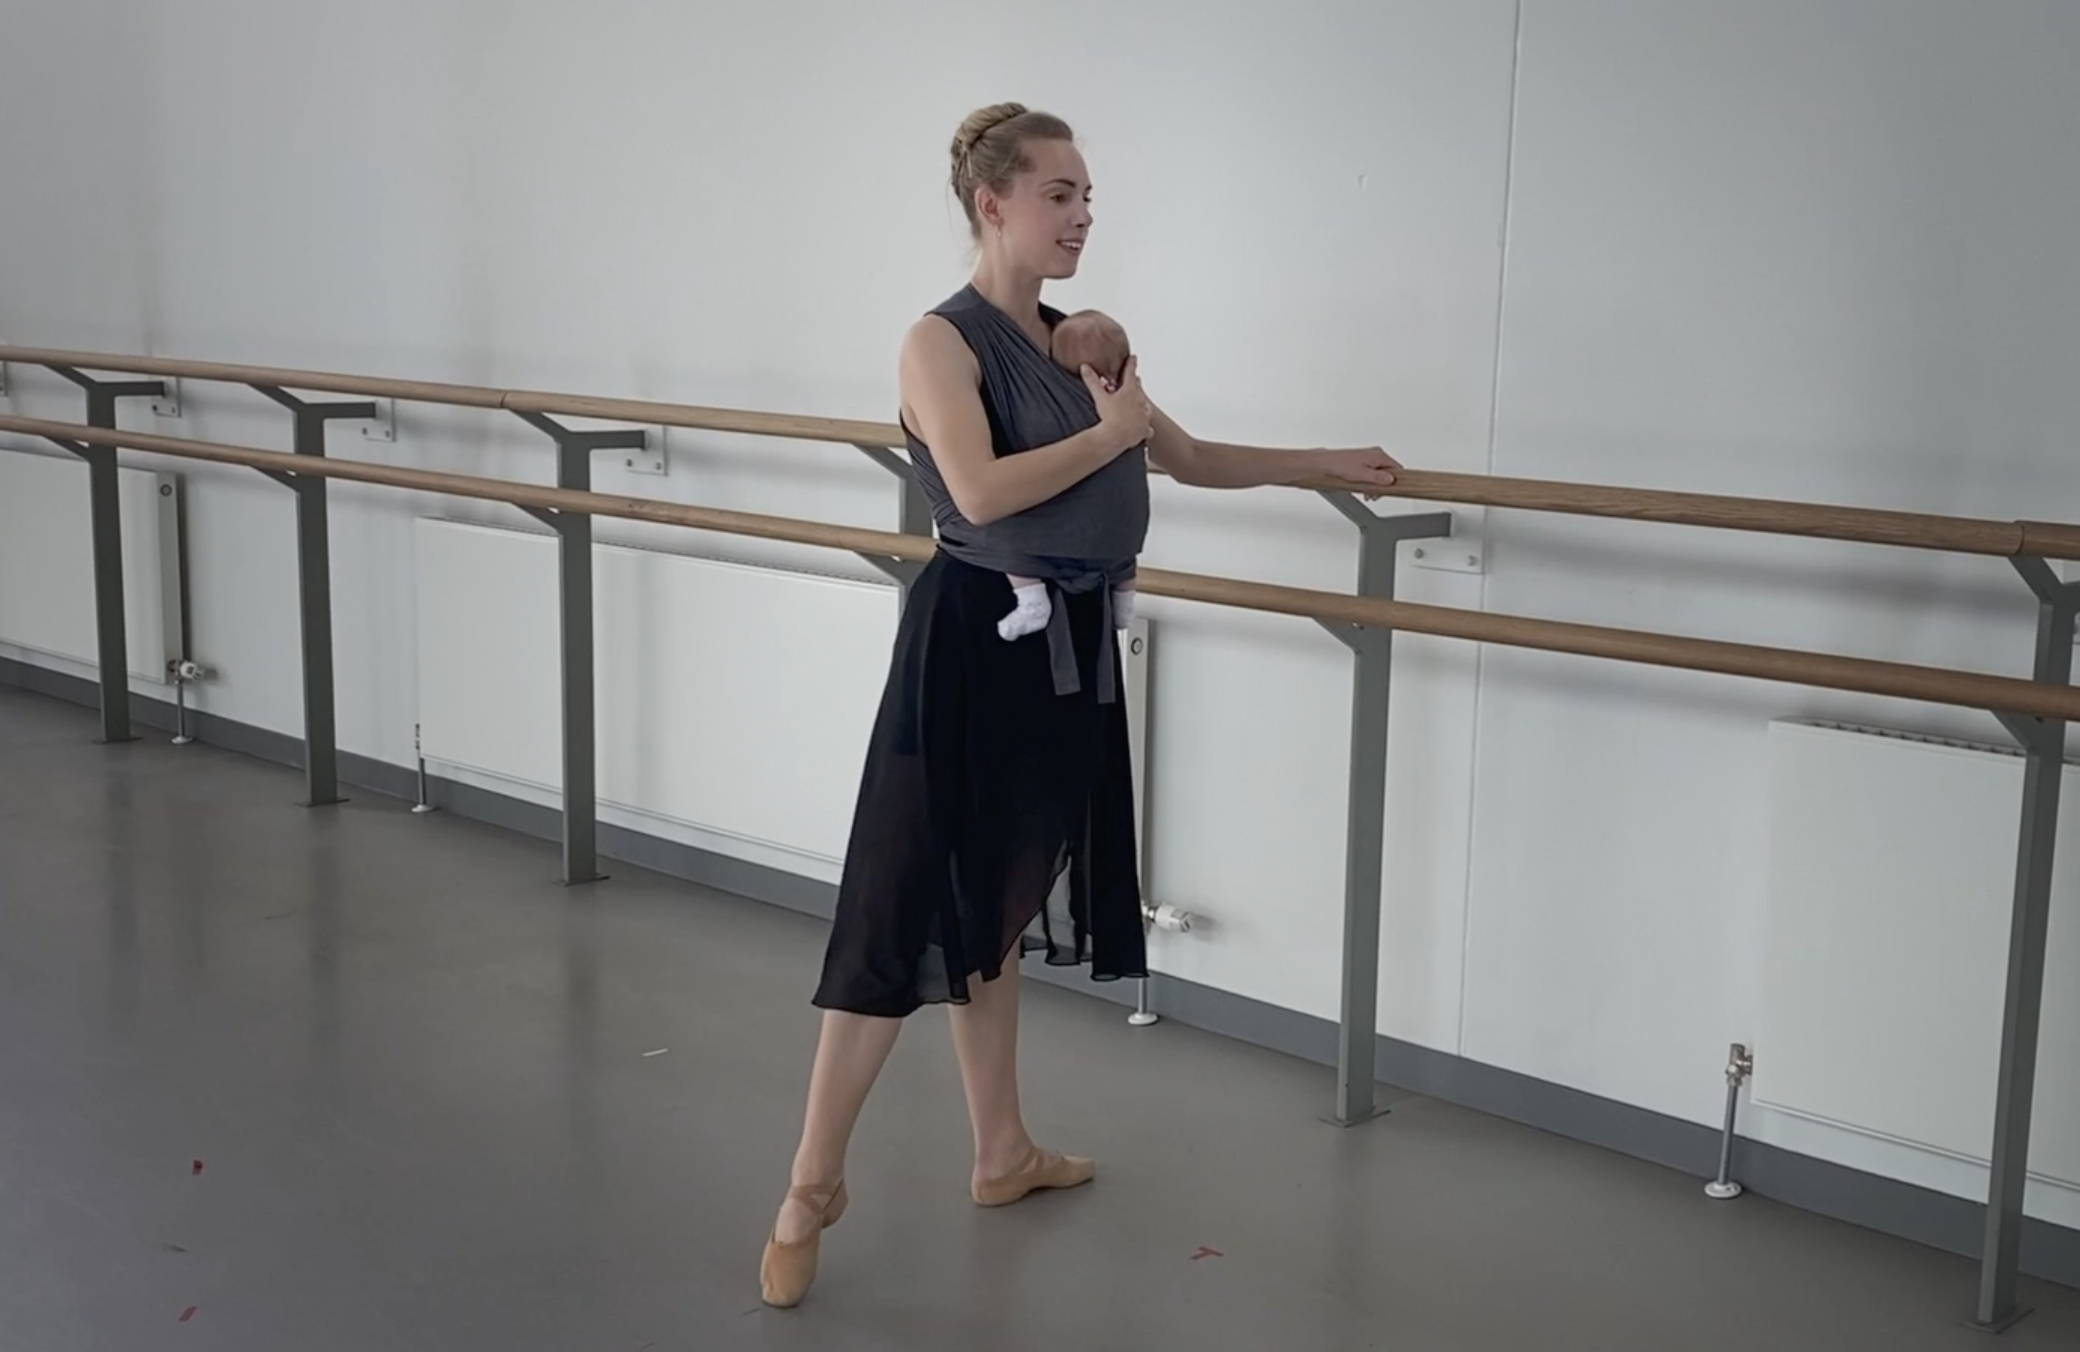 Bethany Kingsley-Garner stands in tendu second, her left hand on the barre and her right hand cradling the head of her newborn, who is swaddled in a carrier strapped to her chest.